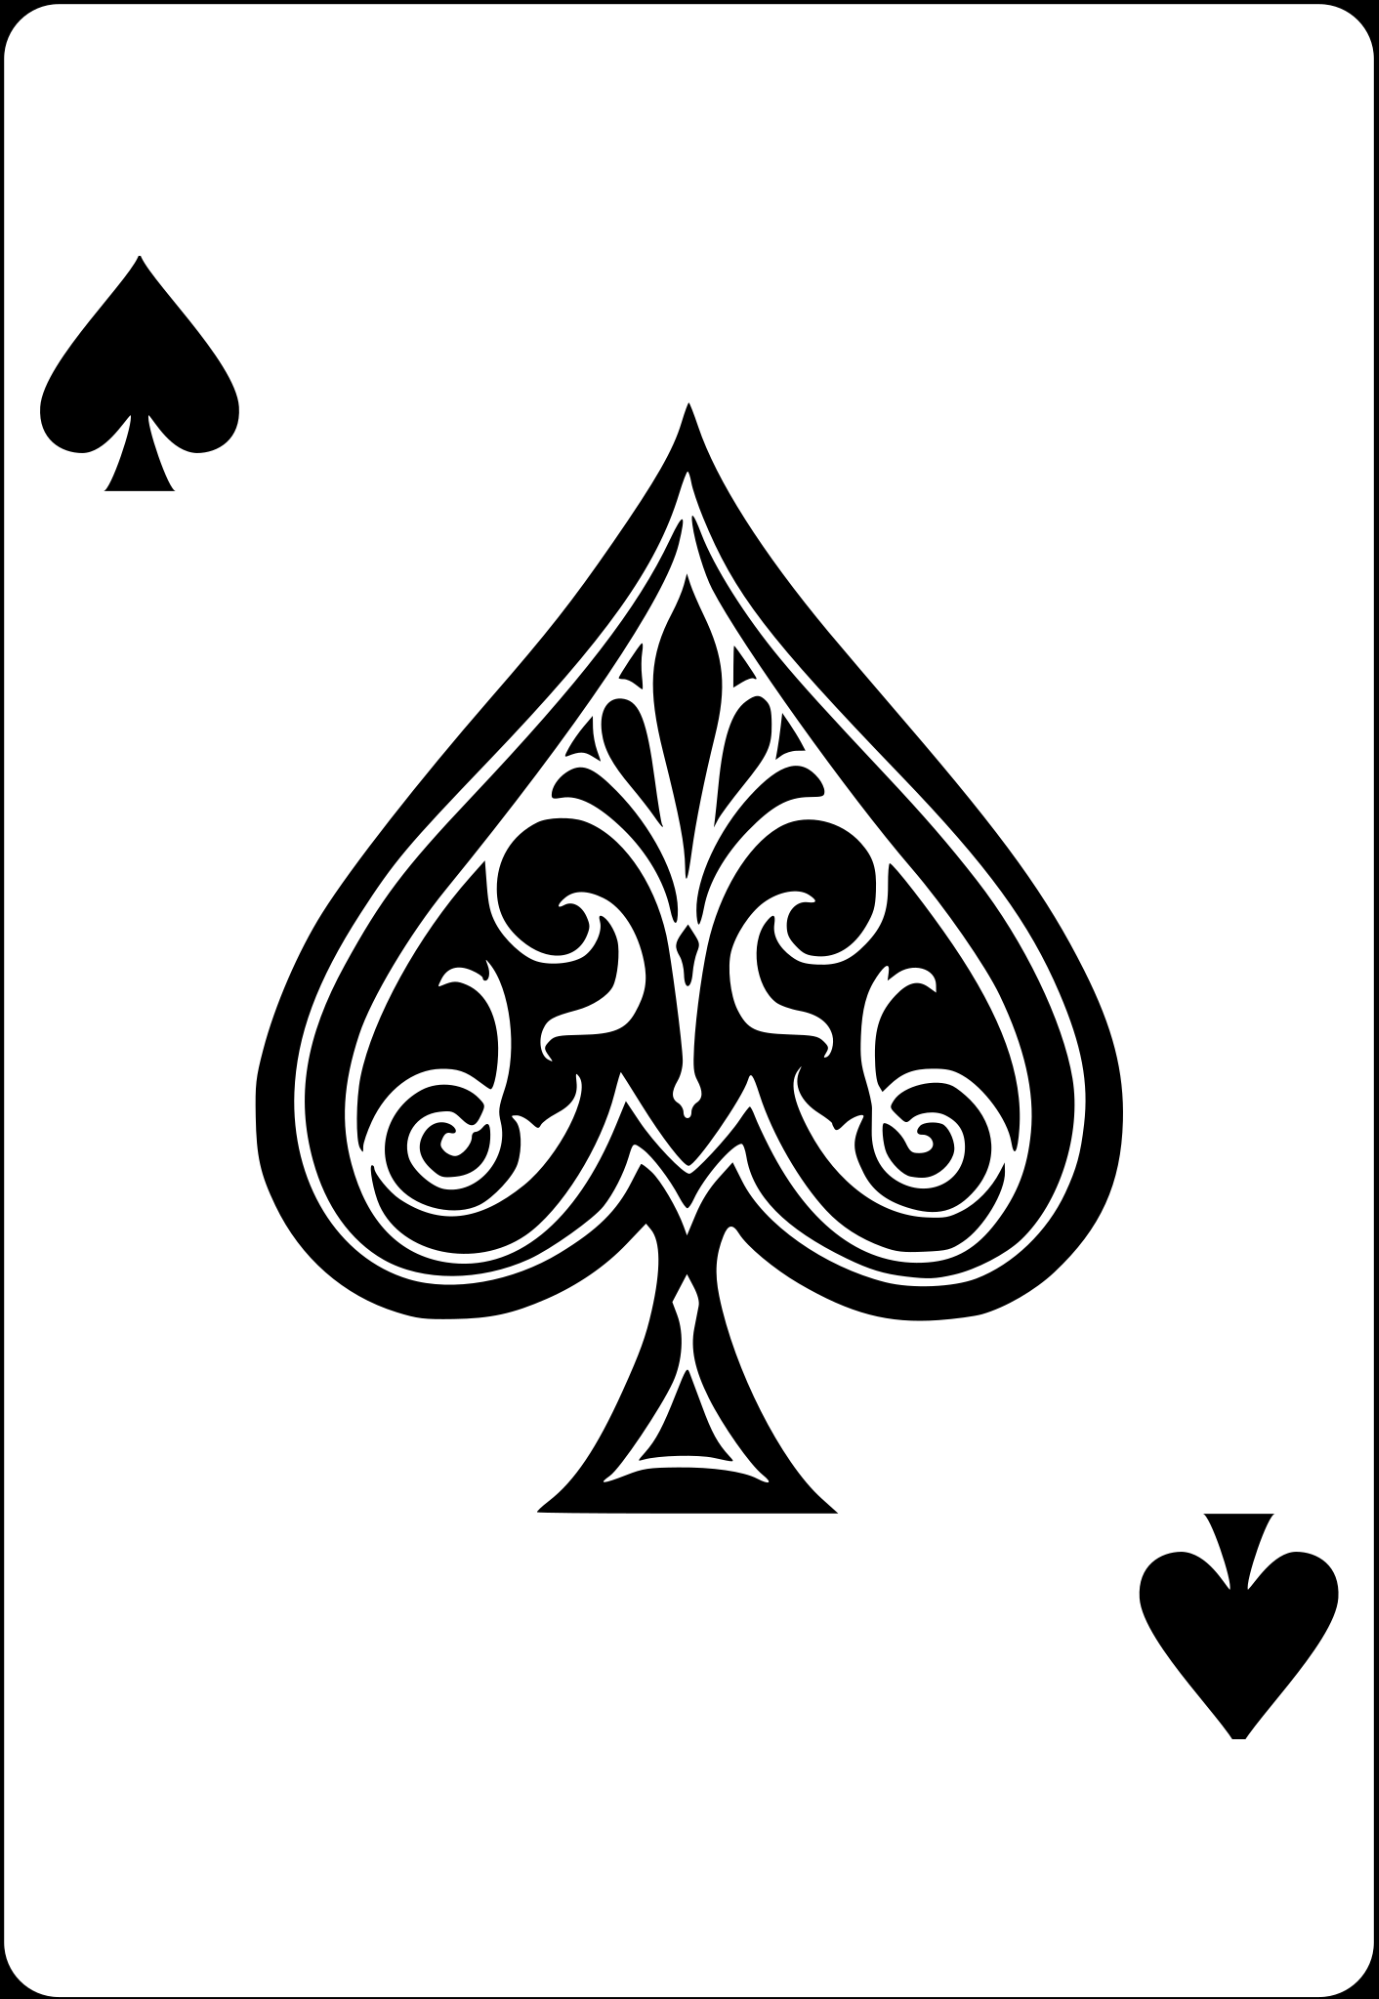 A playing card with one large spade on it.